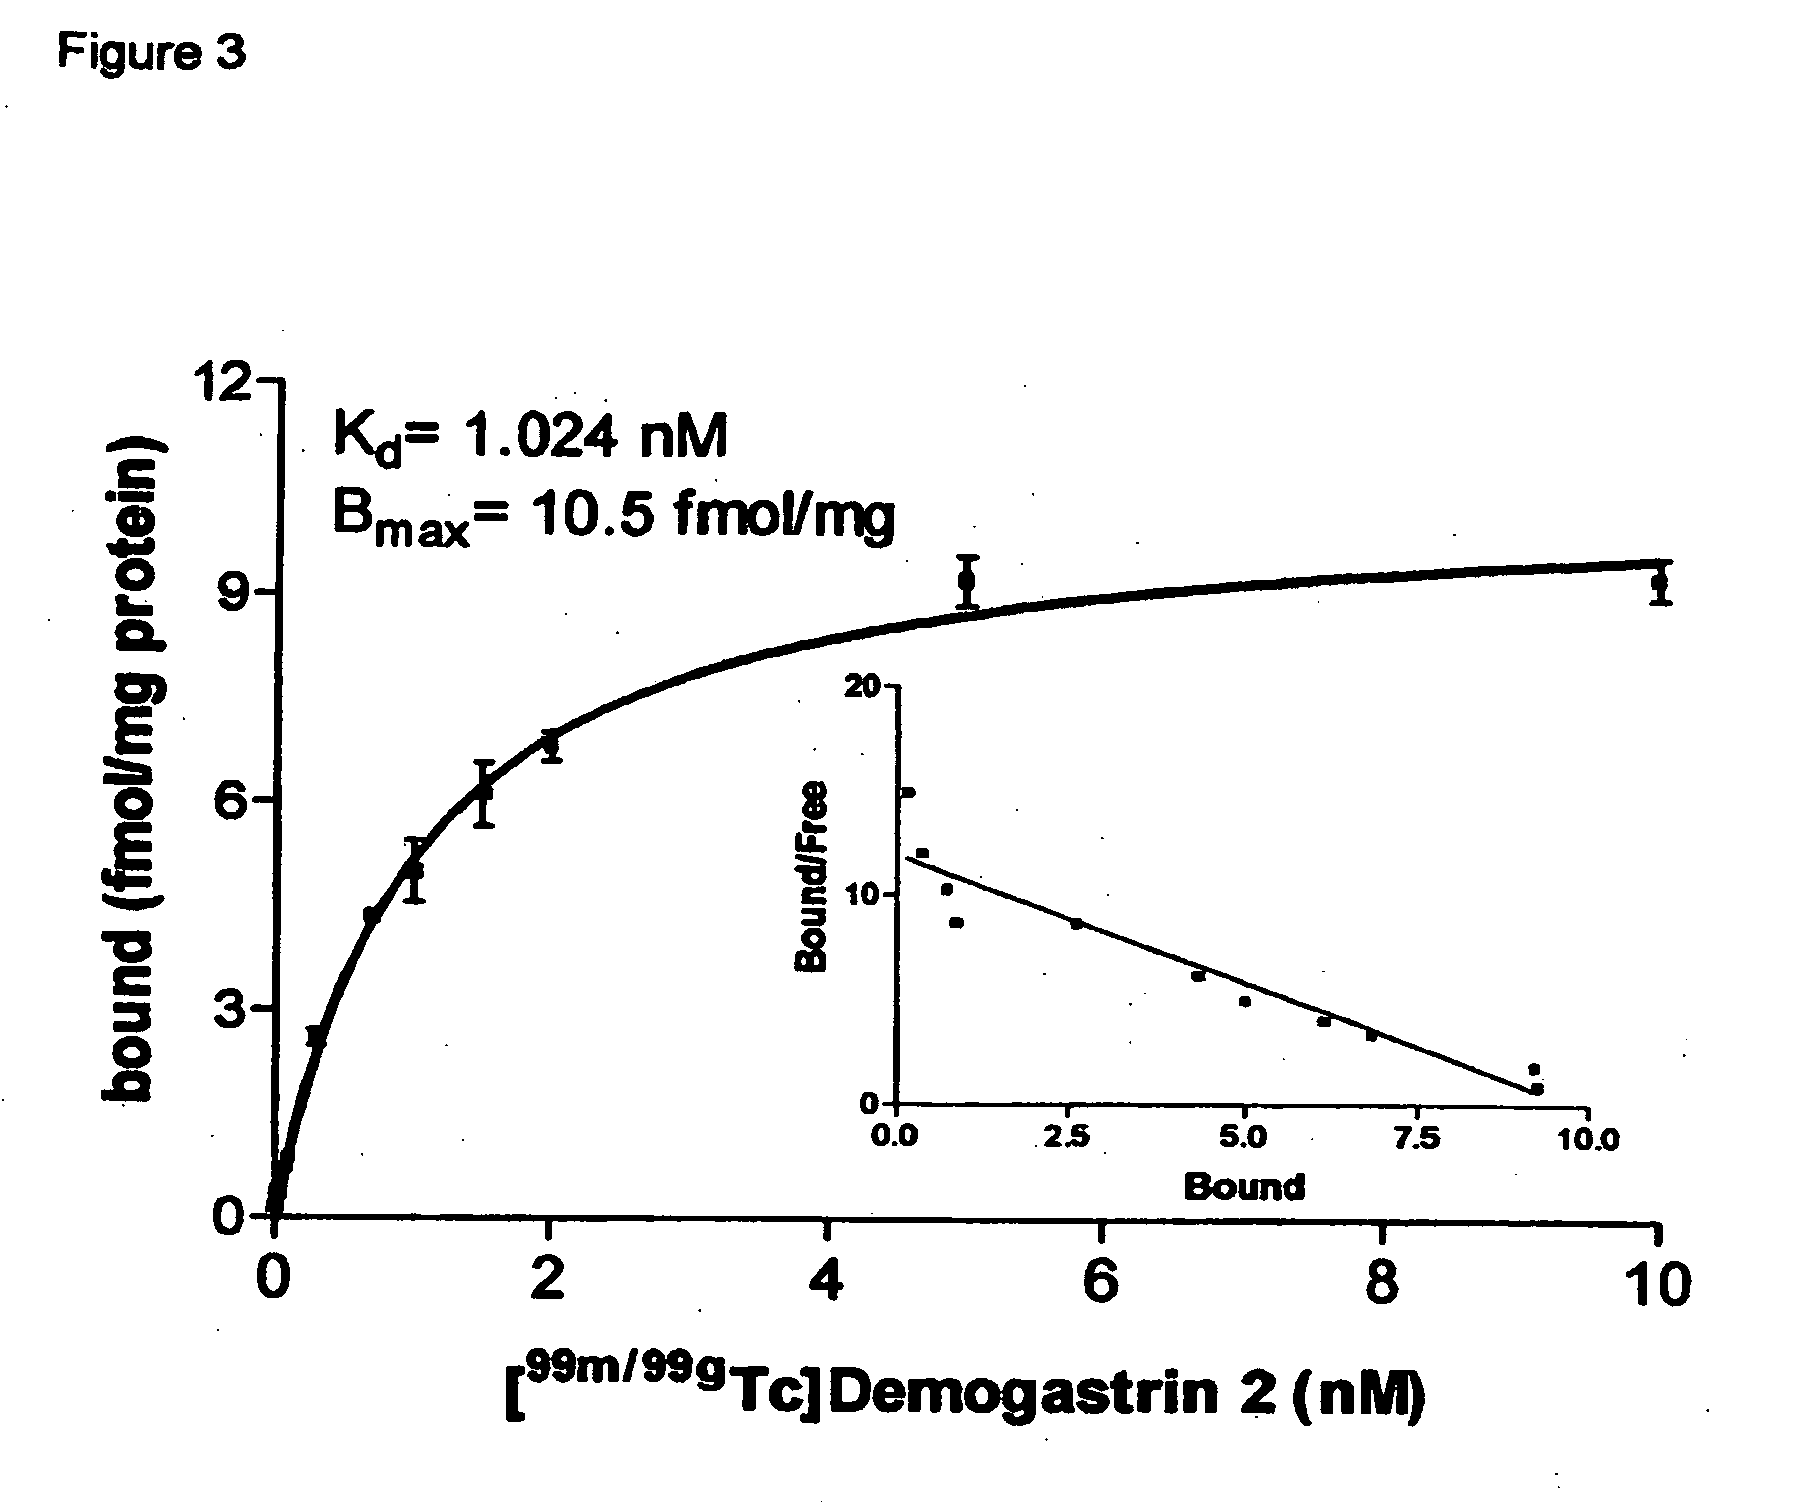 Modified minigastrin analogs for oncology applications